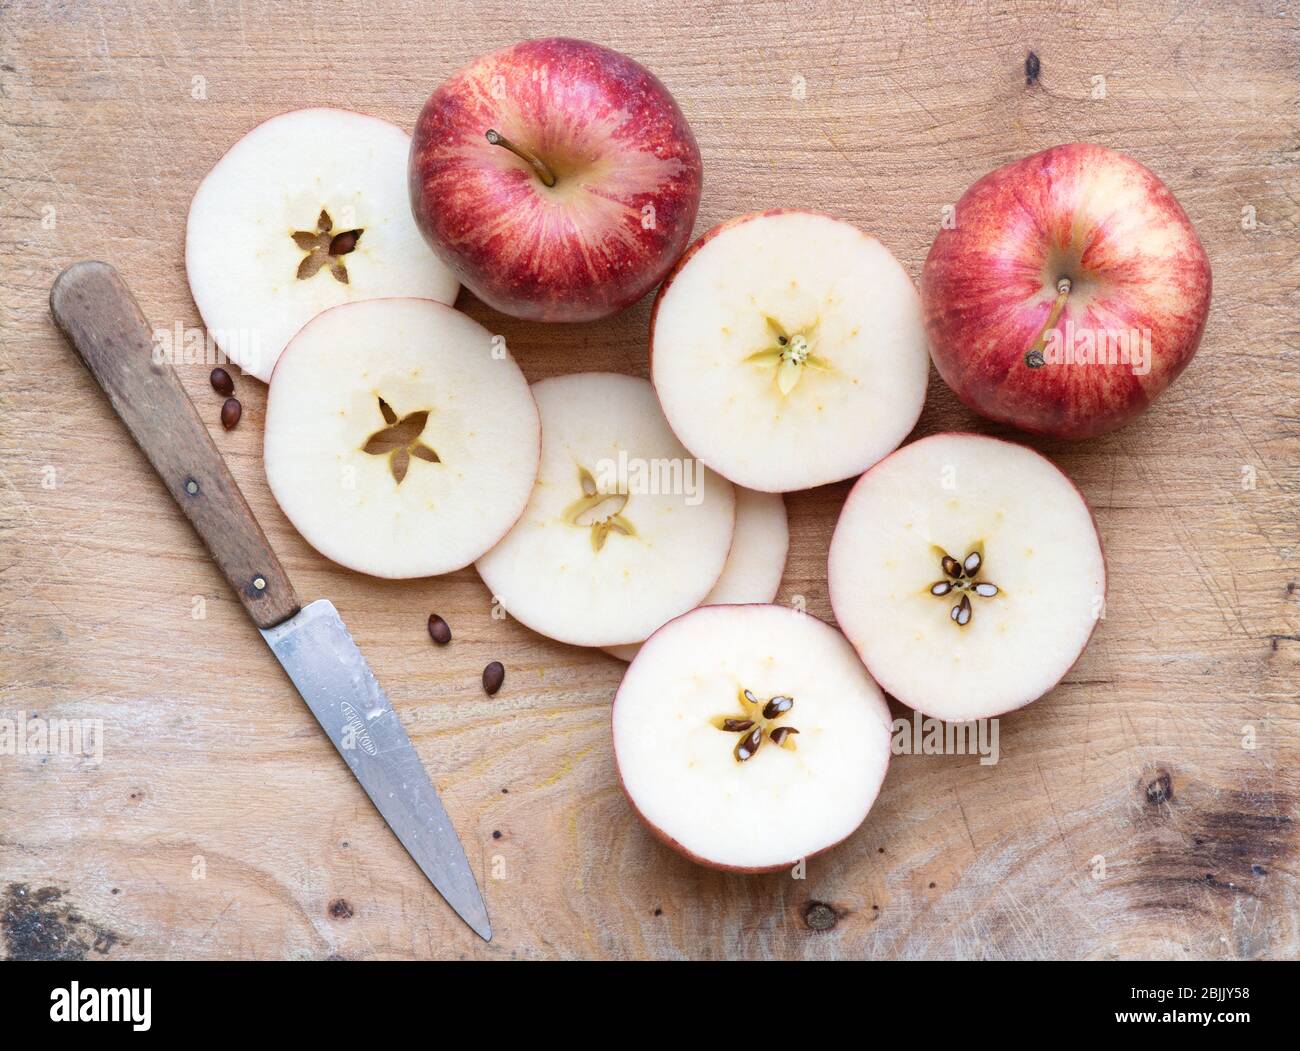 Malus Domestica. Red apple slices on a wooden board Stock Photo